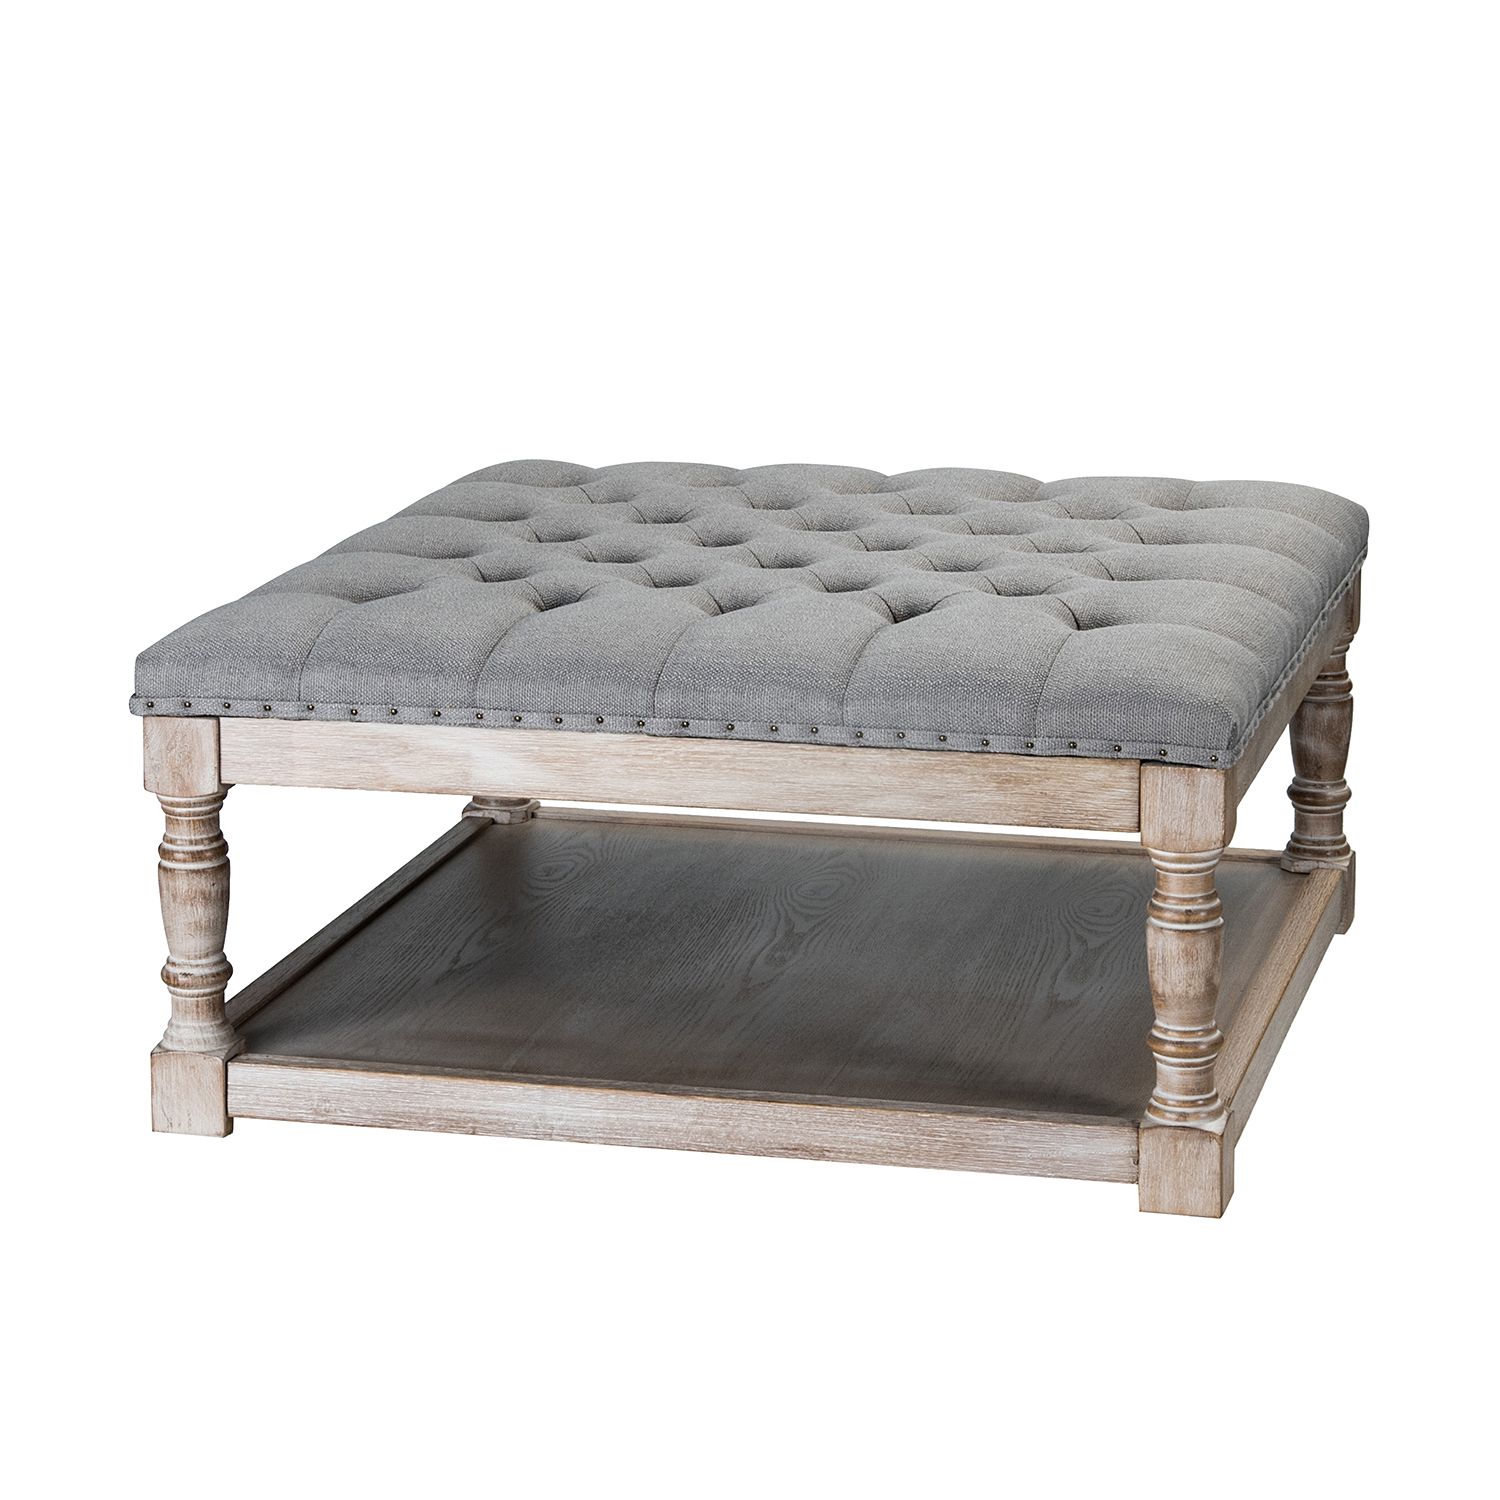 Recent 14 Karat Home Tufted Cocktail Ottoman Wooden With Storage Shelf, Square  Upholstered Ottoman Coffee Table, Grey – Walmart Within Beige Thomas Ottomans (View 8 of 10)